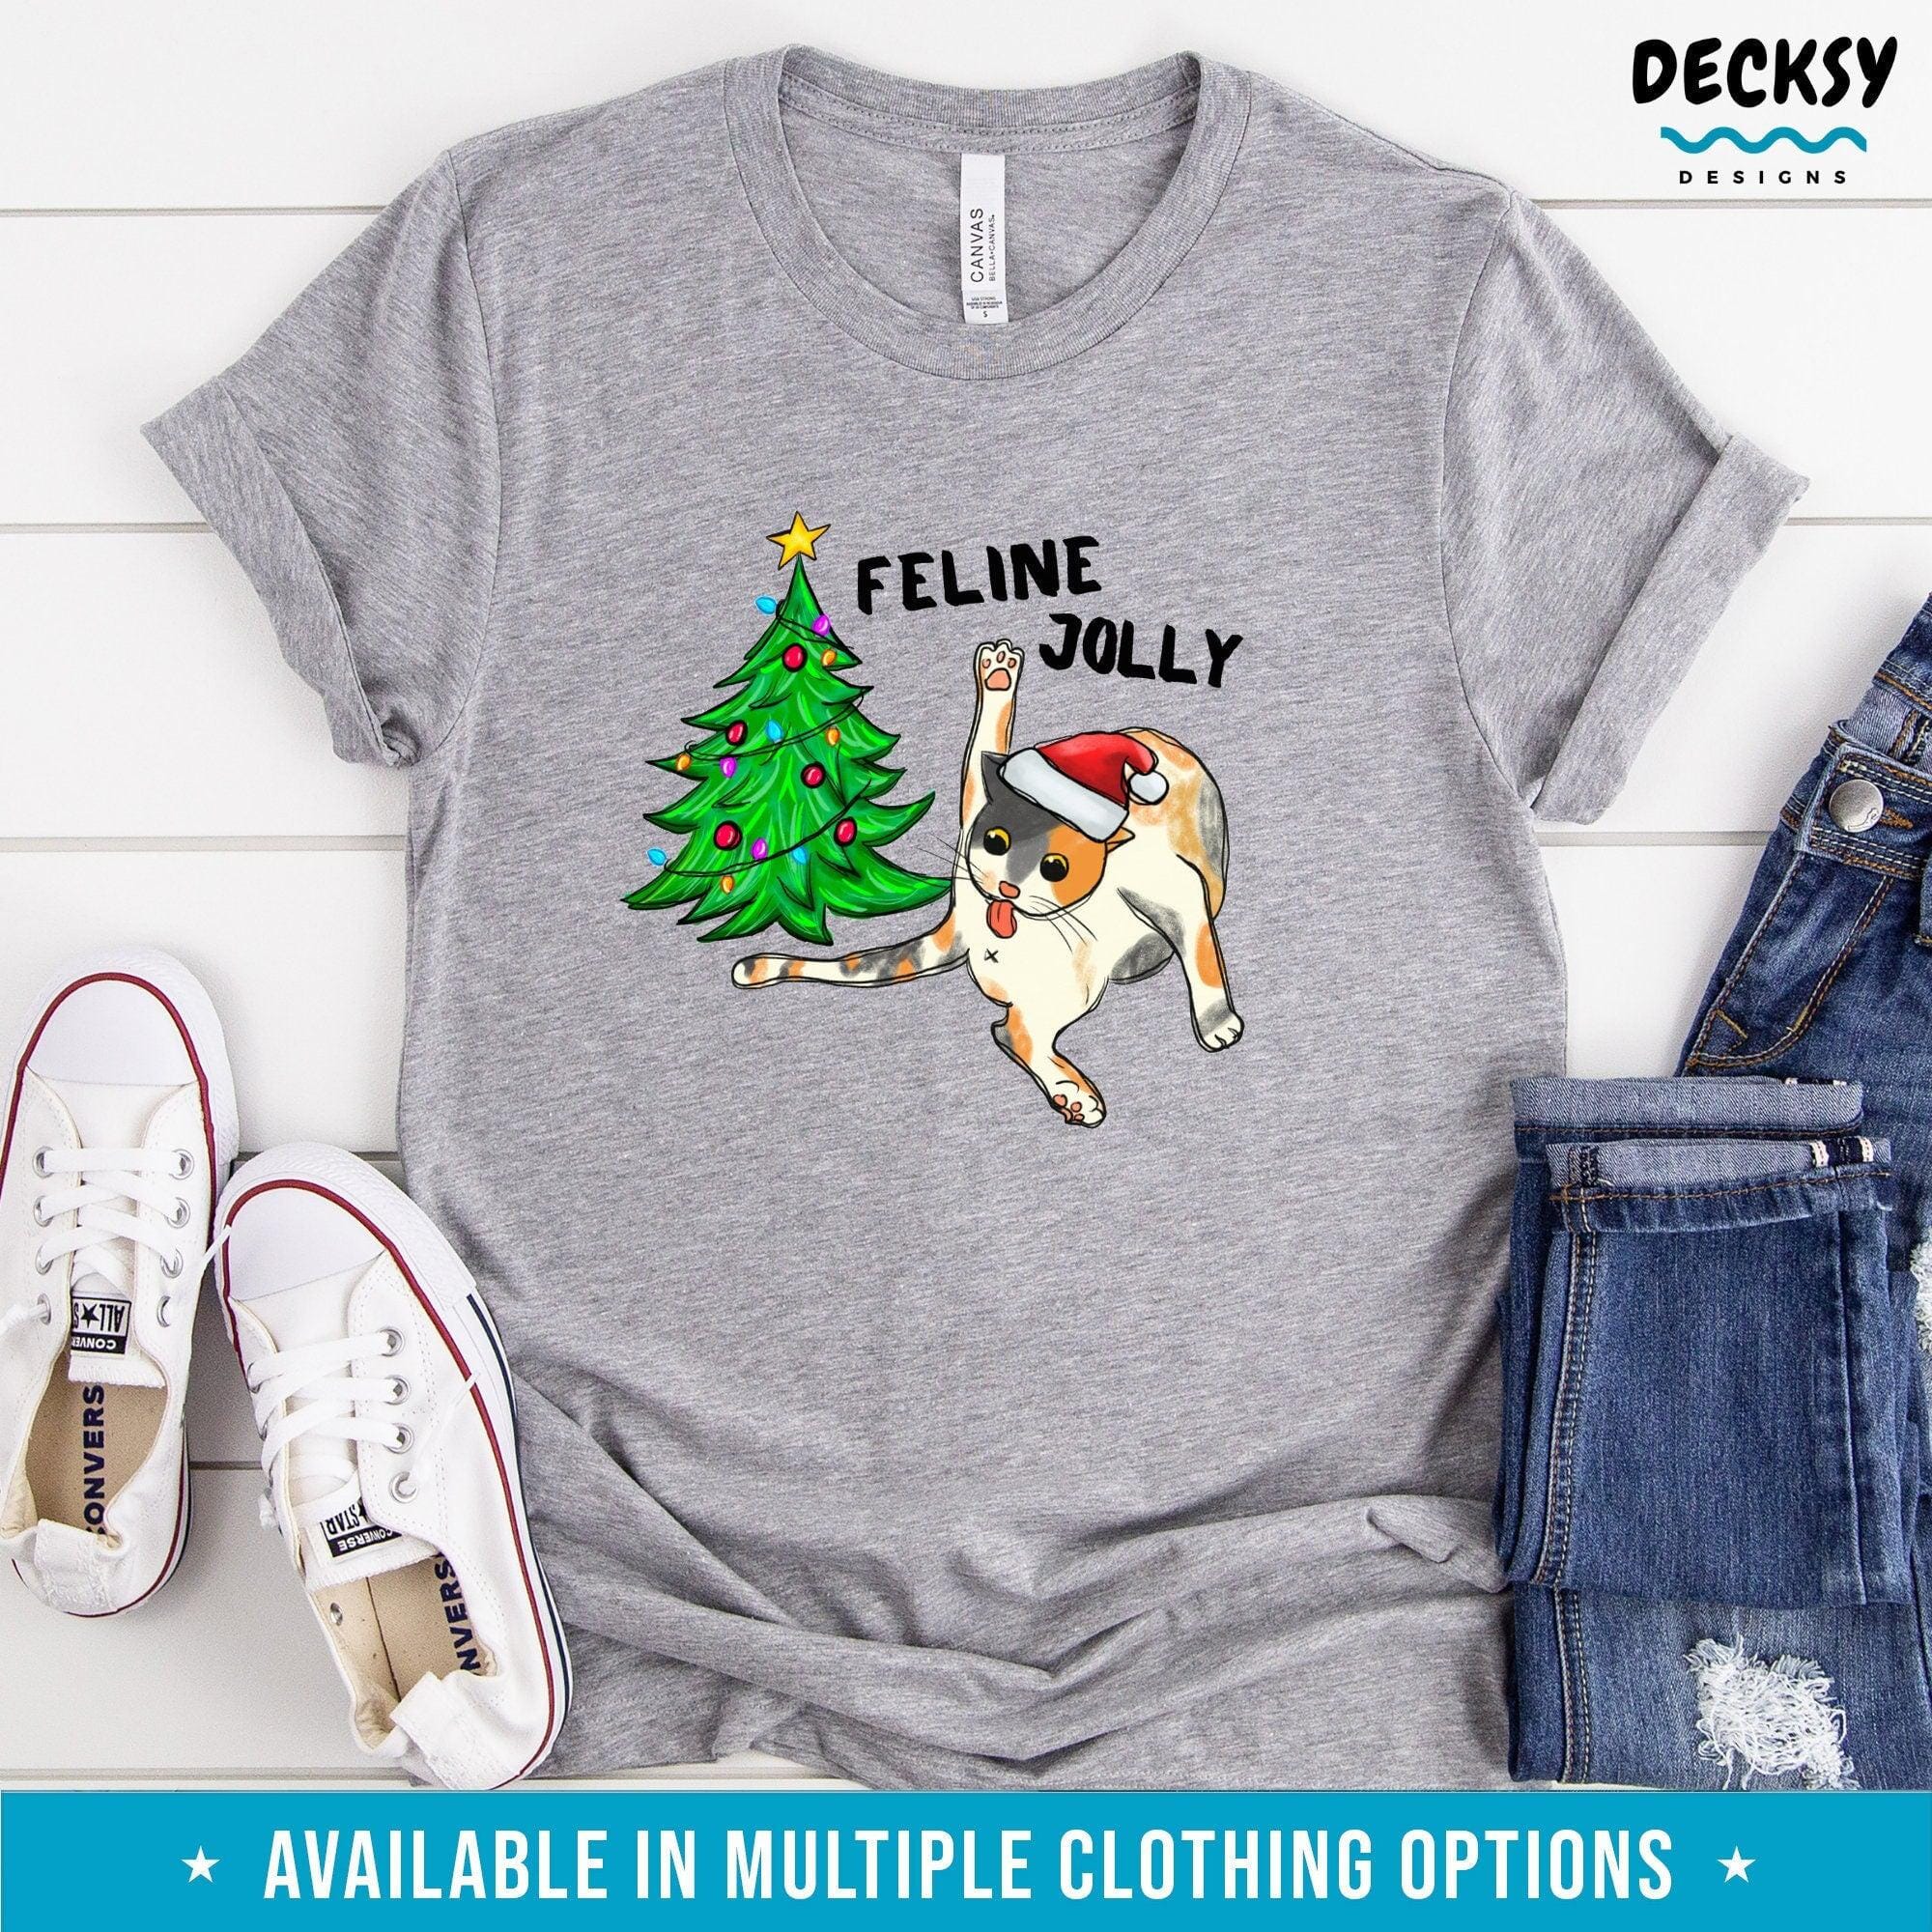 Cat Christmas Tree Shirt, Funny Xmas Gift for Cat Lover-Clothing:Gender-Neutral Adult Clothing:Tops & Tees:T-shirts:Graphic Tees-DecksyDesigns